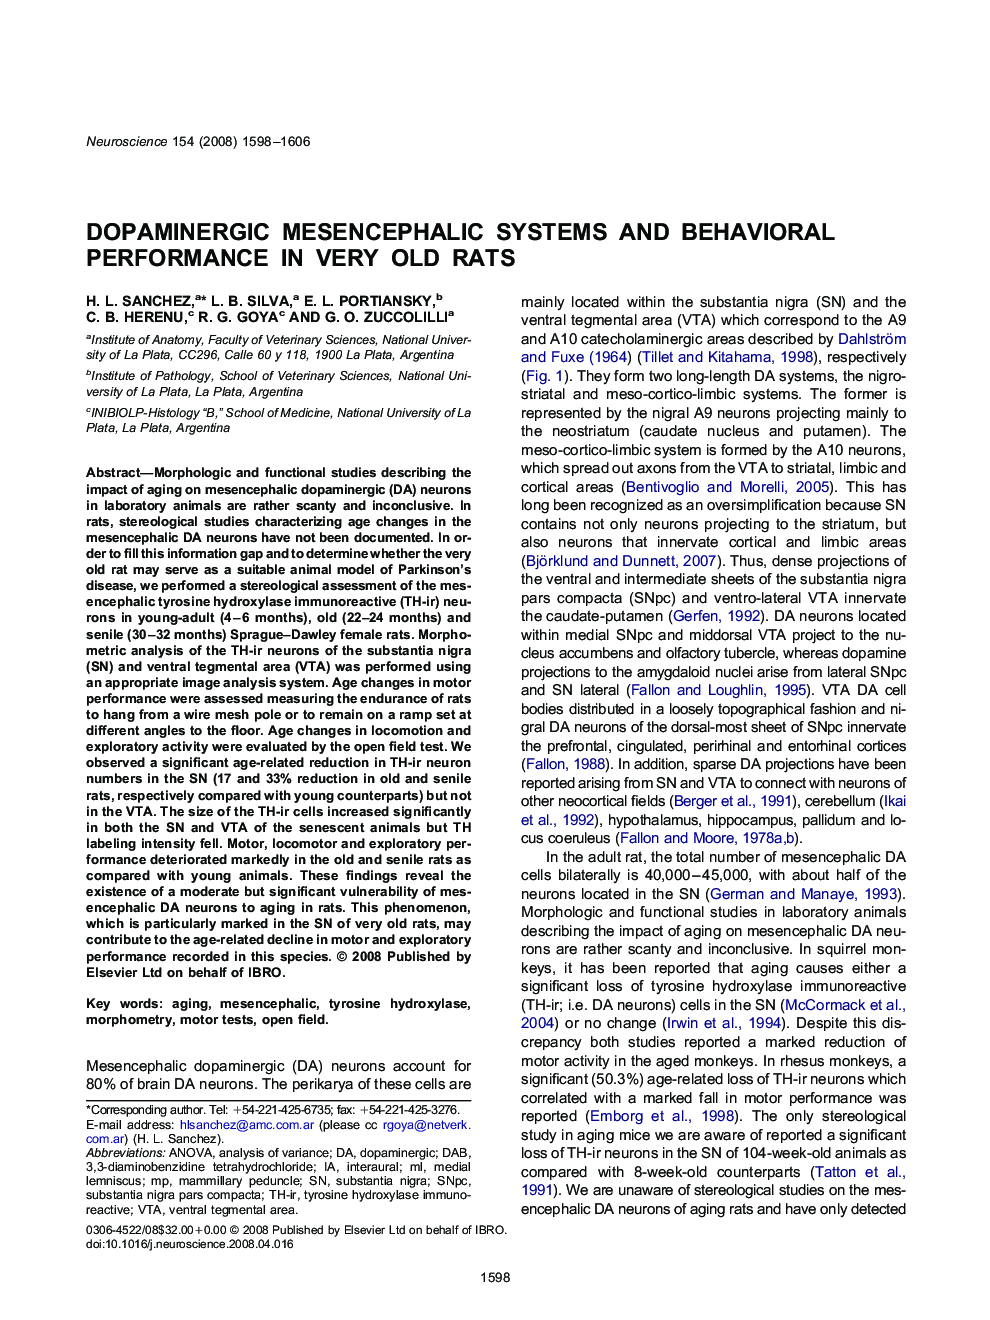 Dopaminergic mesencephalic systems and behavioral performance in very old rats